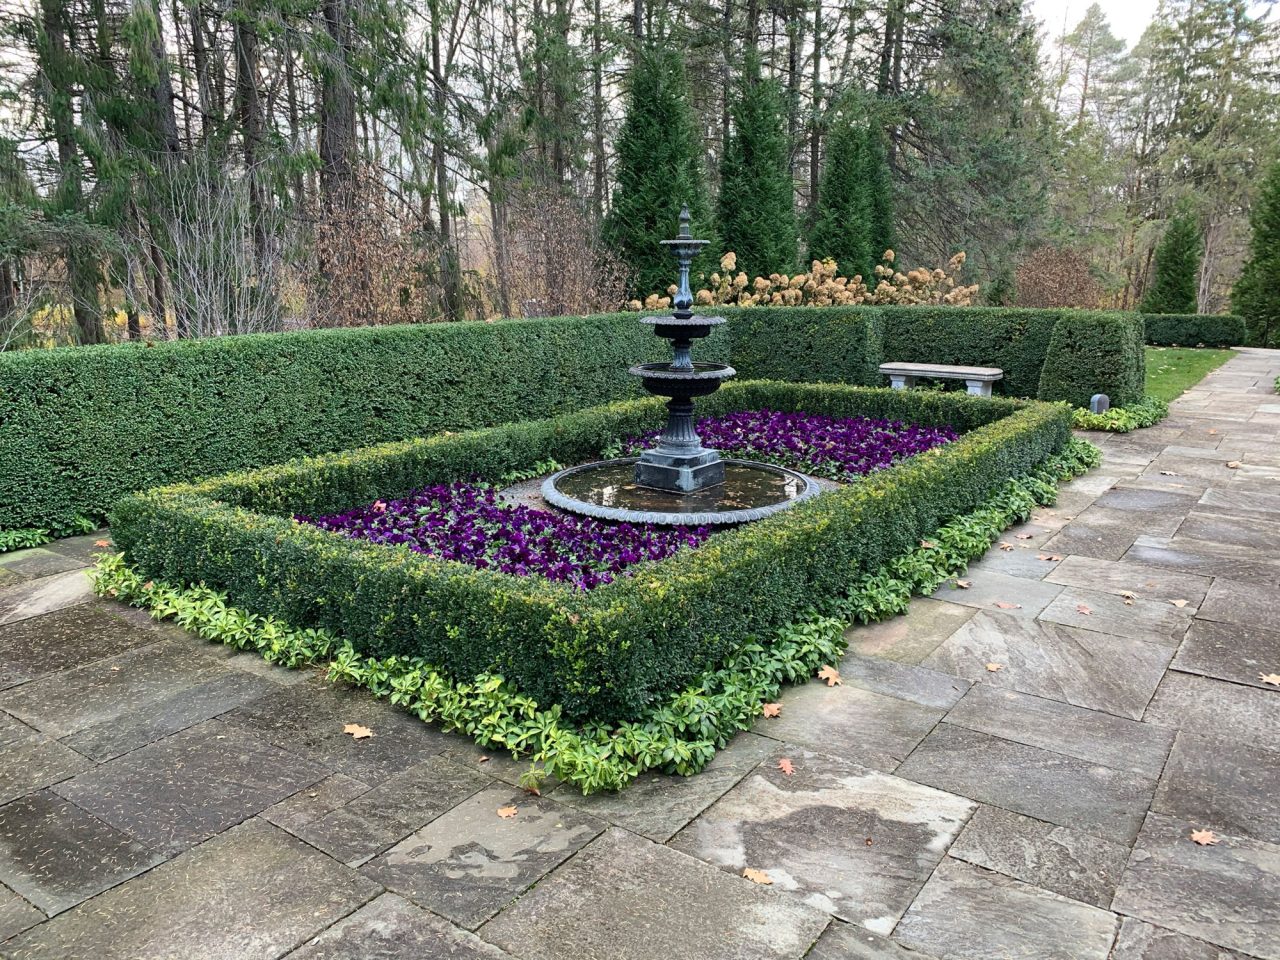 Three-tiered fountain surrounded by boxed hedges, annuals, and groundcover